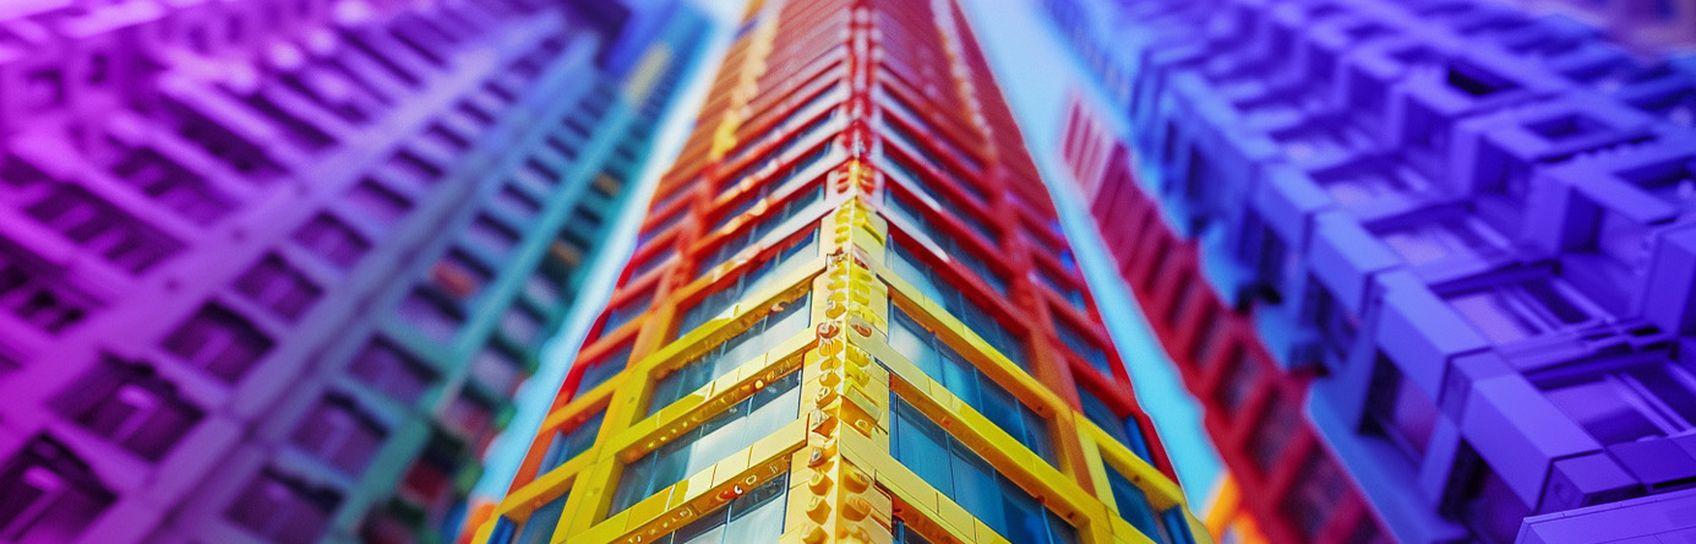 A skyscraper made from LEGO bricks representing scalable growth